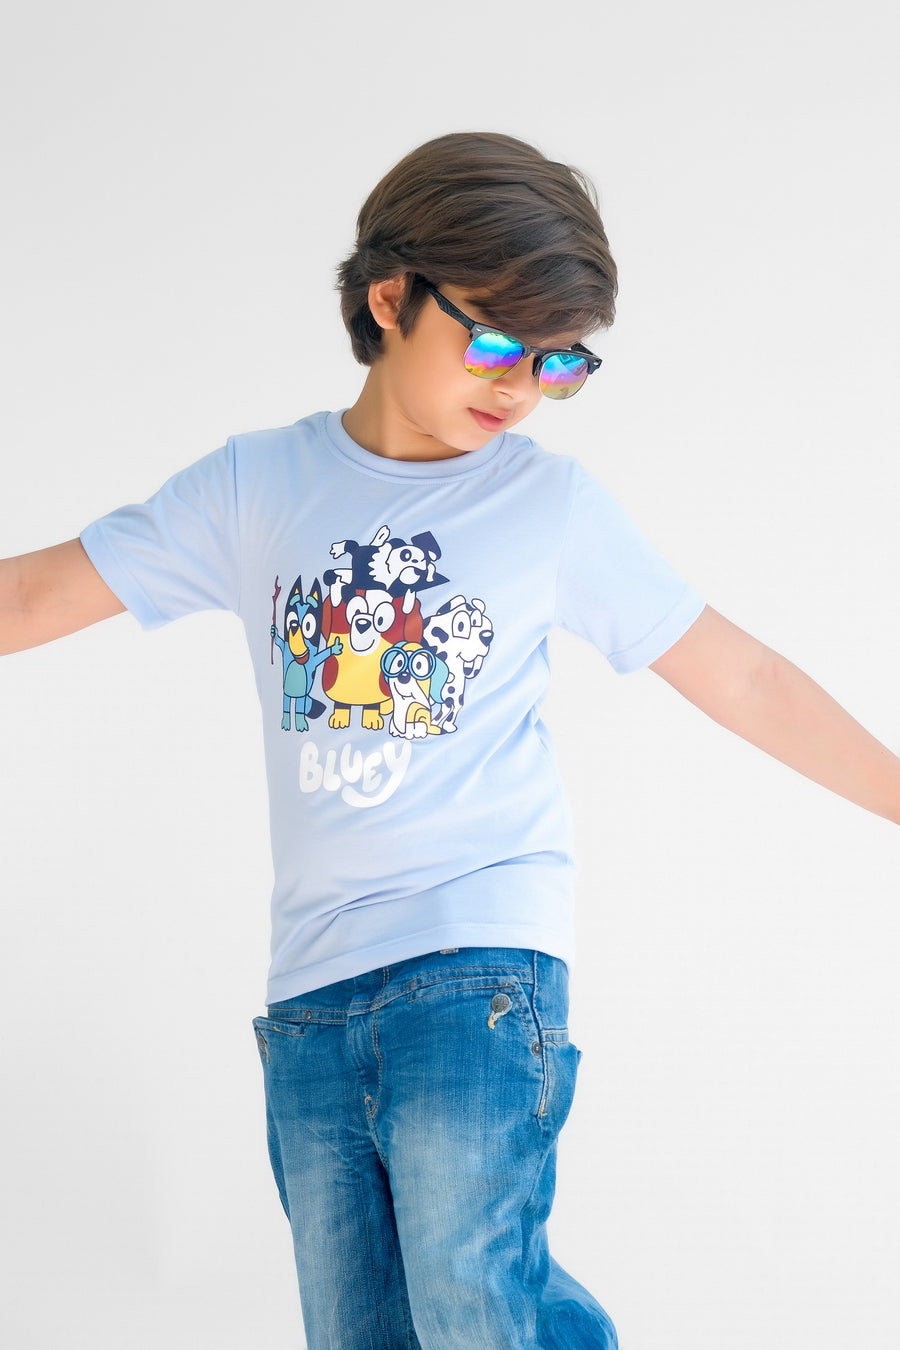 Dogs Life Half Sleeves T-shirts For Kids - Sky Blue